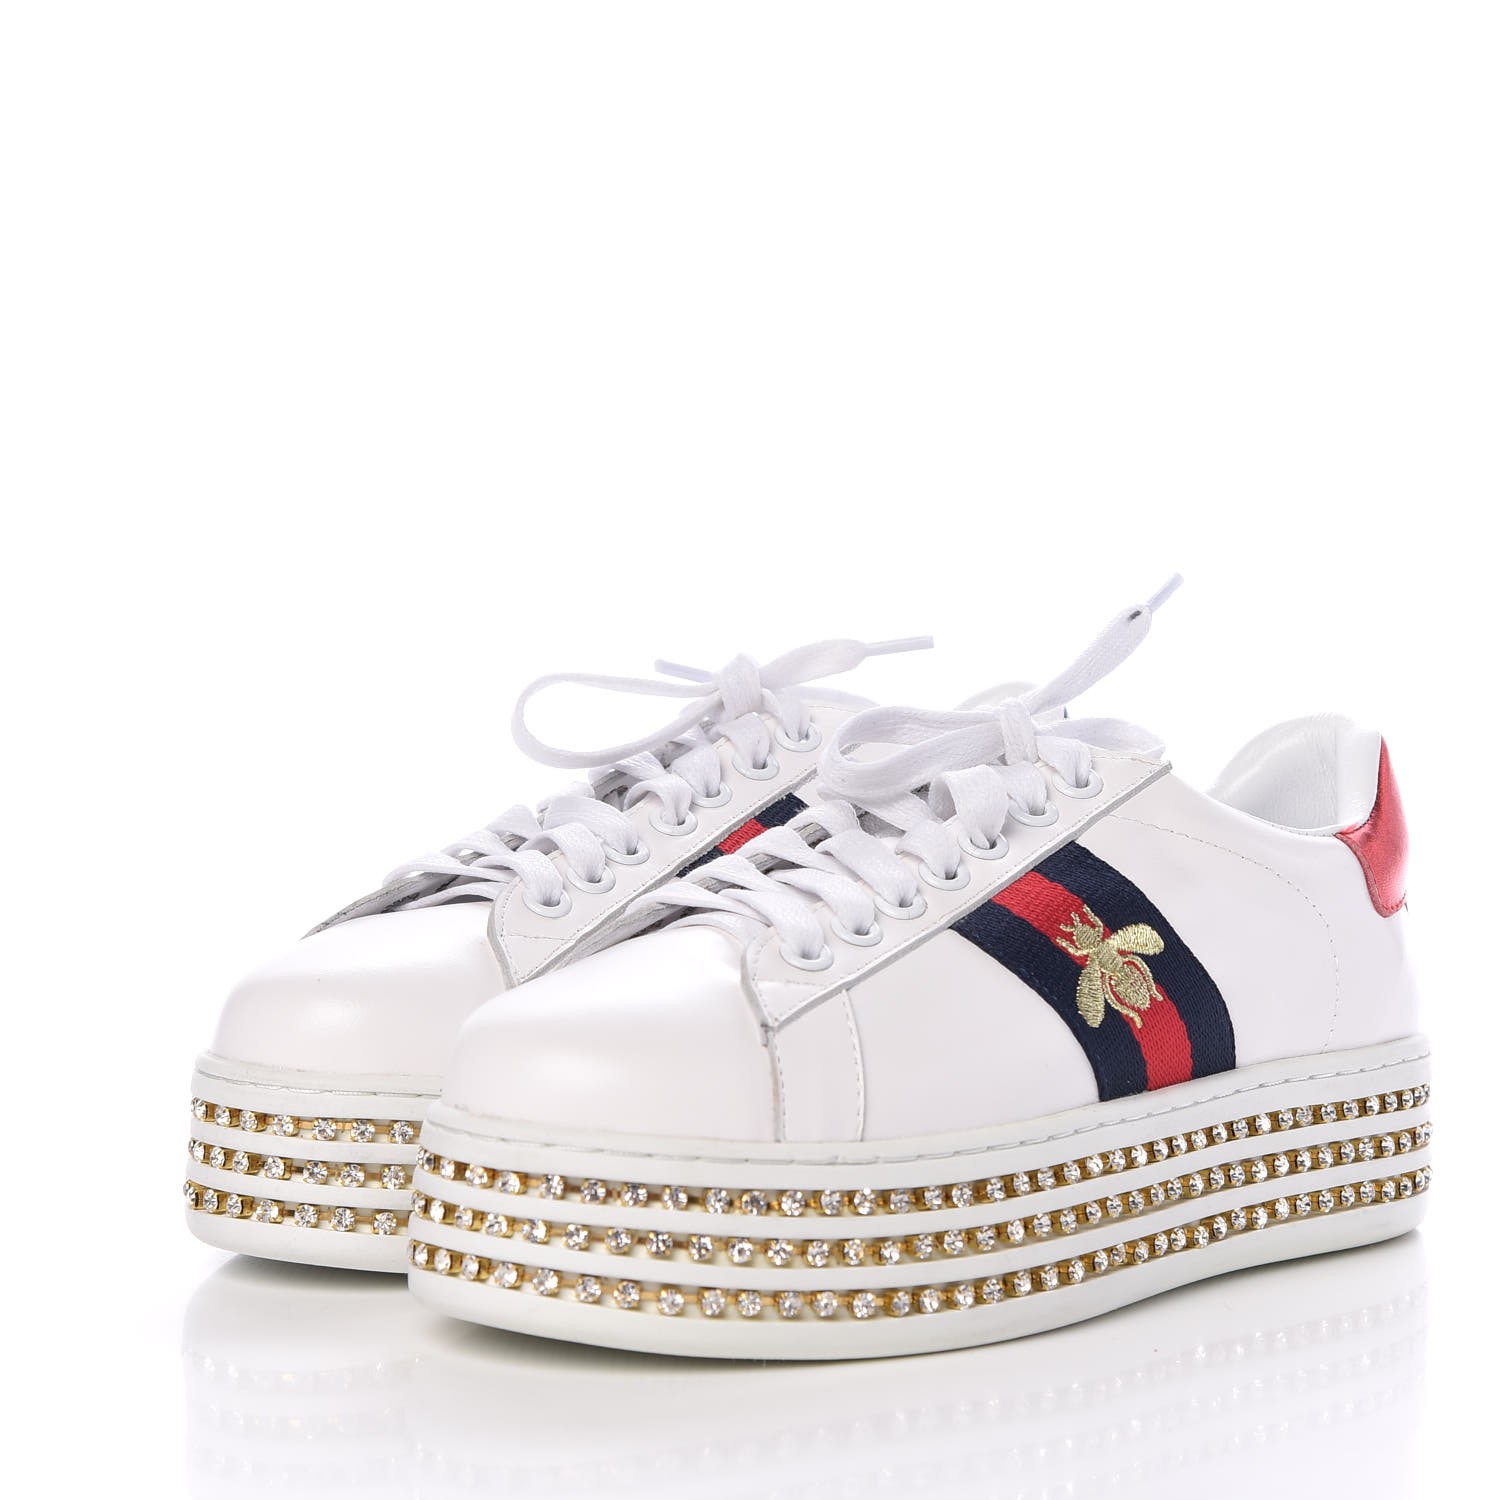 GUCCI Ayers Embroidered Crystal Ace Bee Star Platform Sneakers 37 White ...